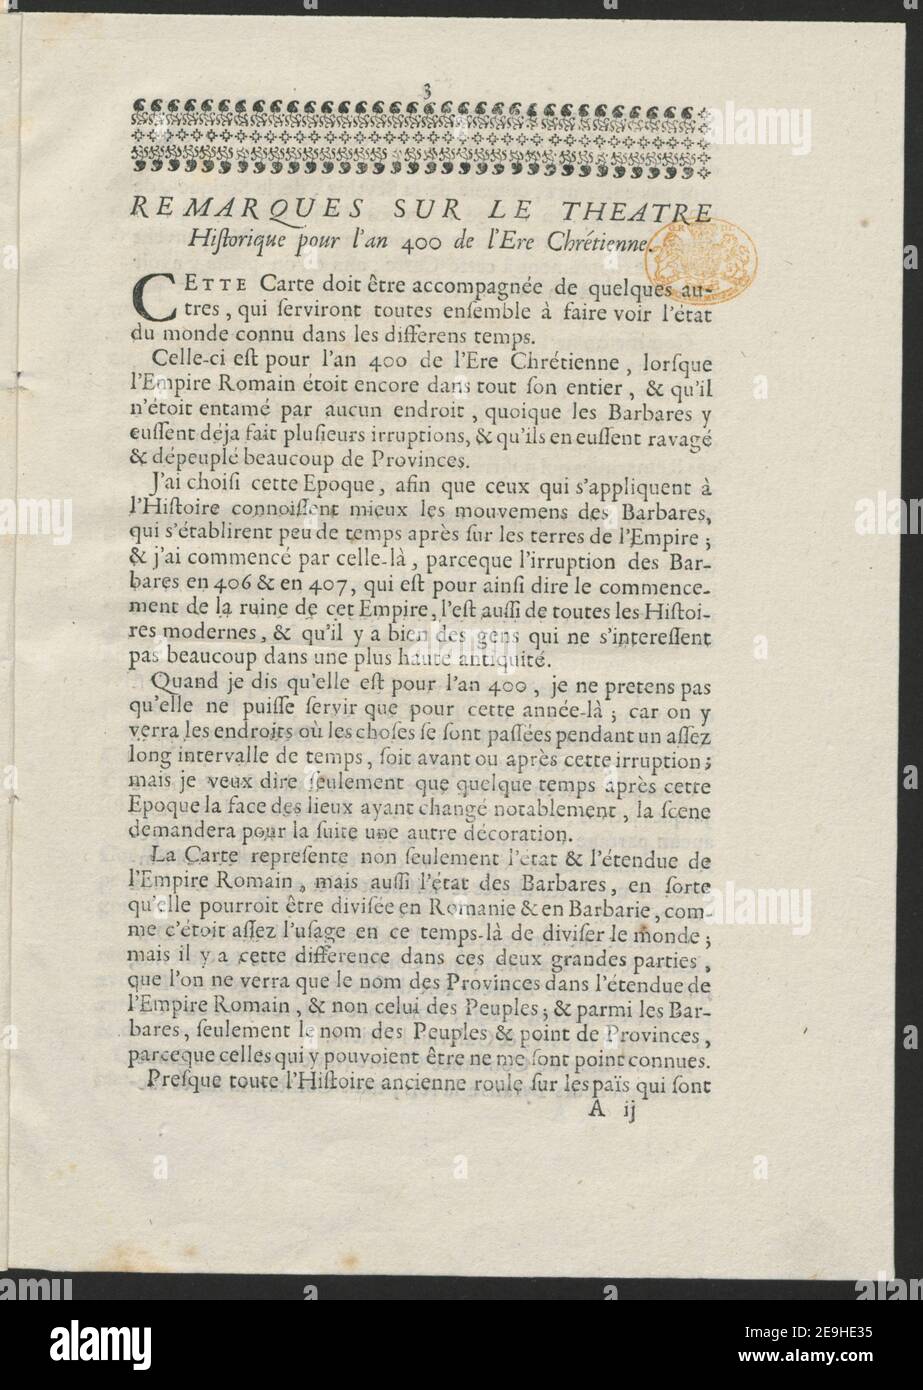 REMARQUES SUR LE THEATRE HISTORIQUE  Author  L'Isle, Guillaume de 2.30.III. Place of publication: [Paris] Publisher: [Guillaume de l'Isle] Date of publication: MDCCV.  Item type: 16 pages Dimensions: 25 x 18 cm (4¬∫)  Former owner: George III, King of Great Britain, 1738-1820 Stock Photo